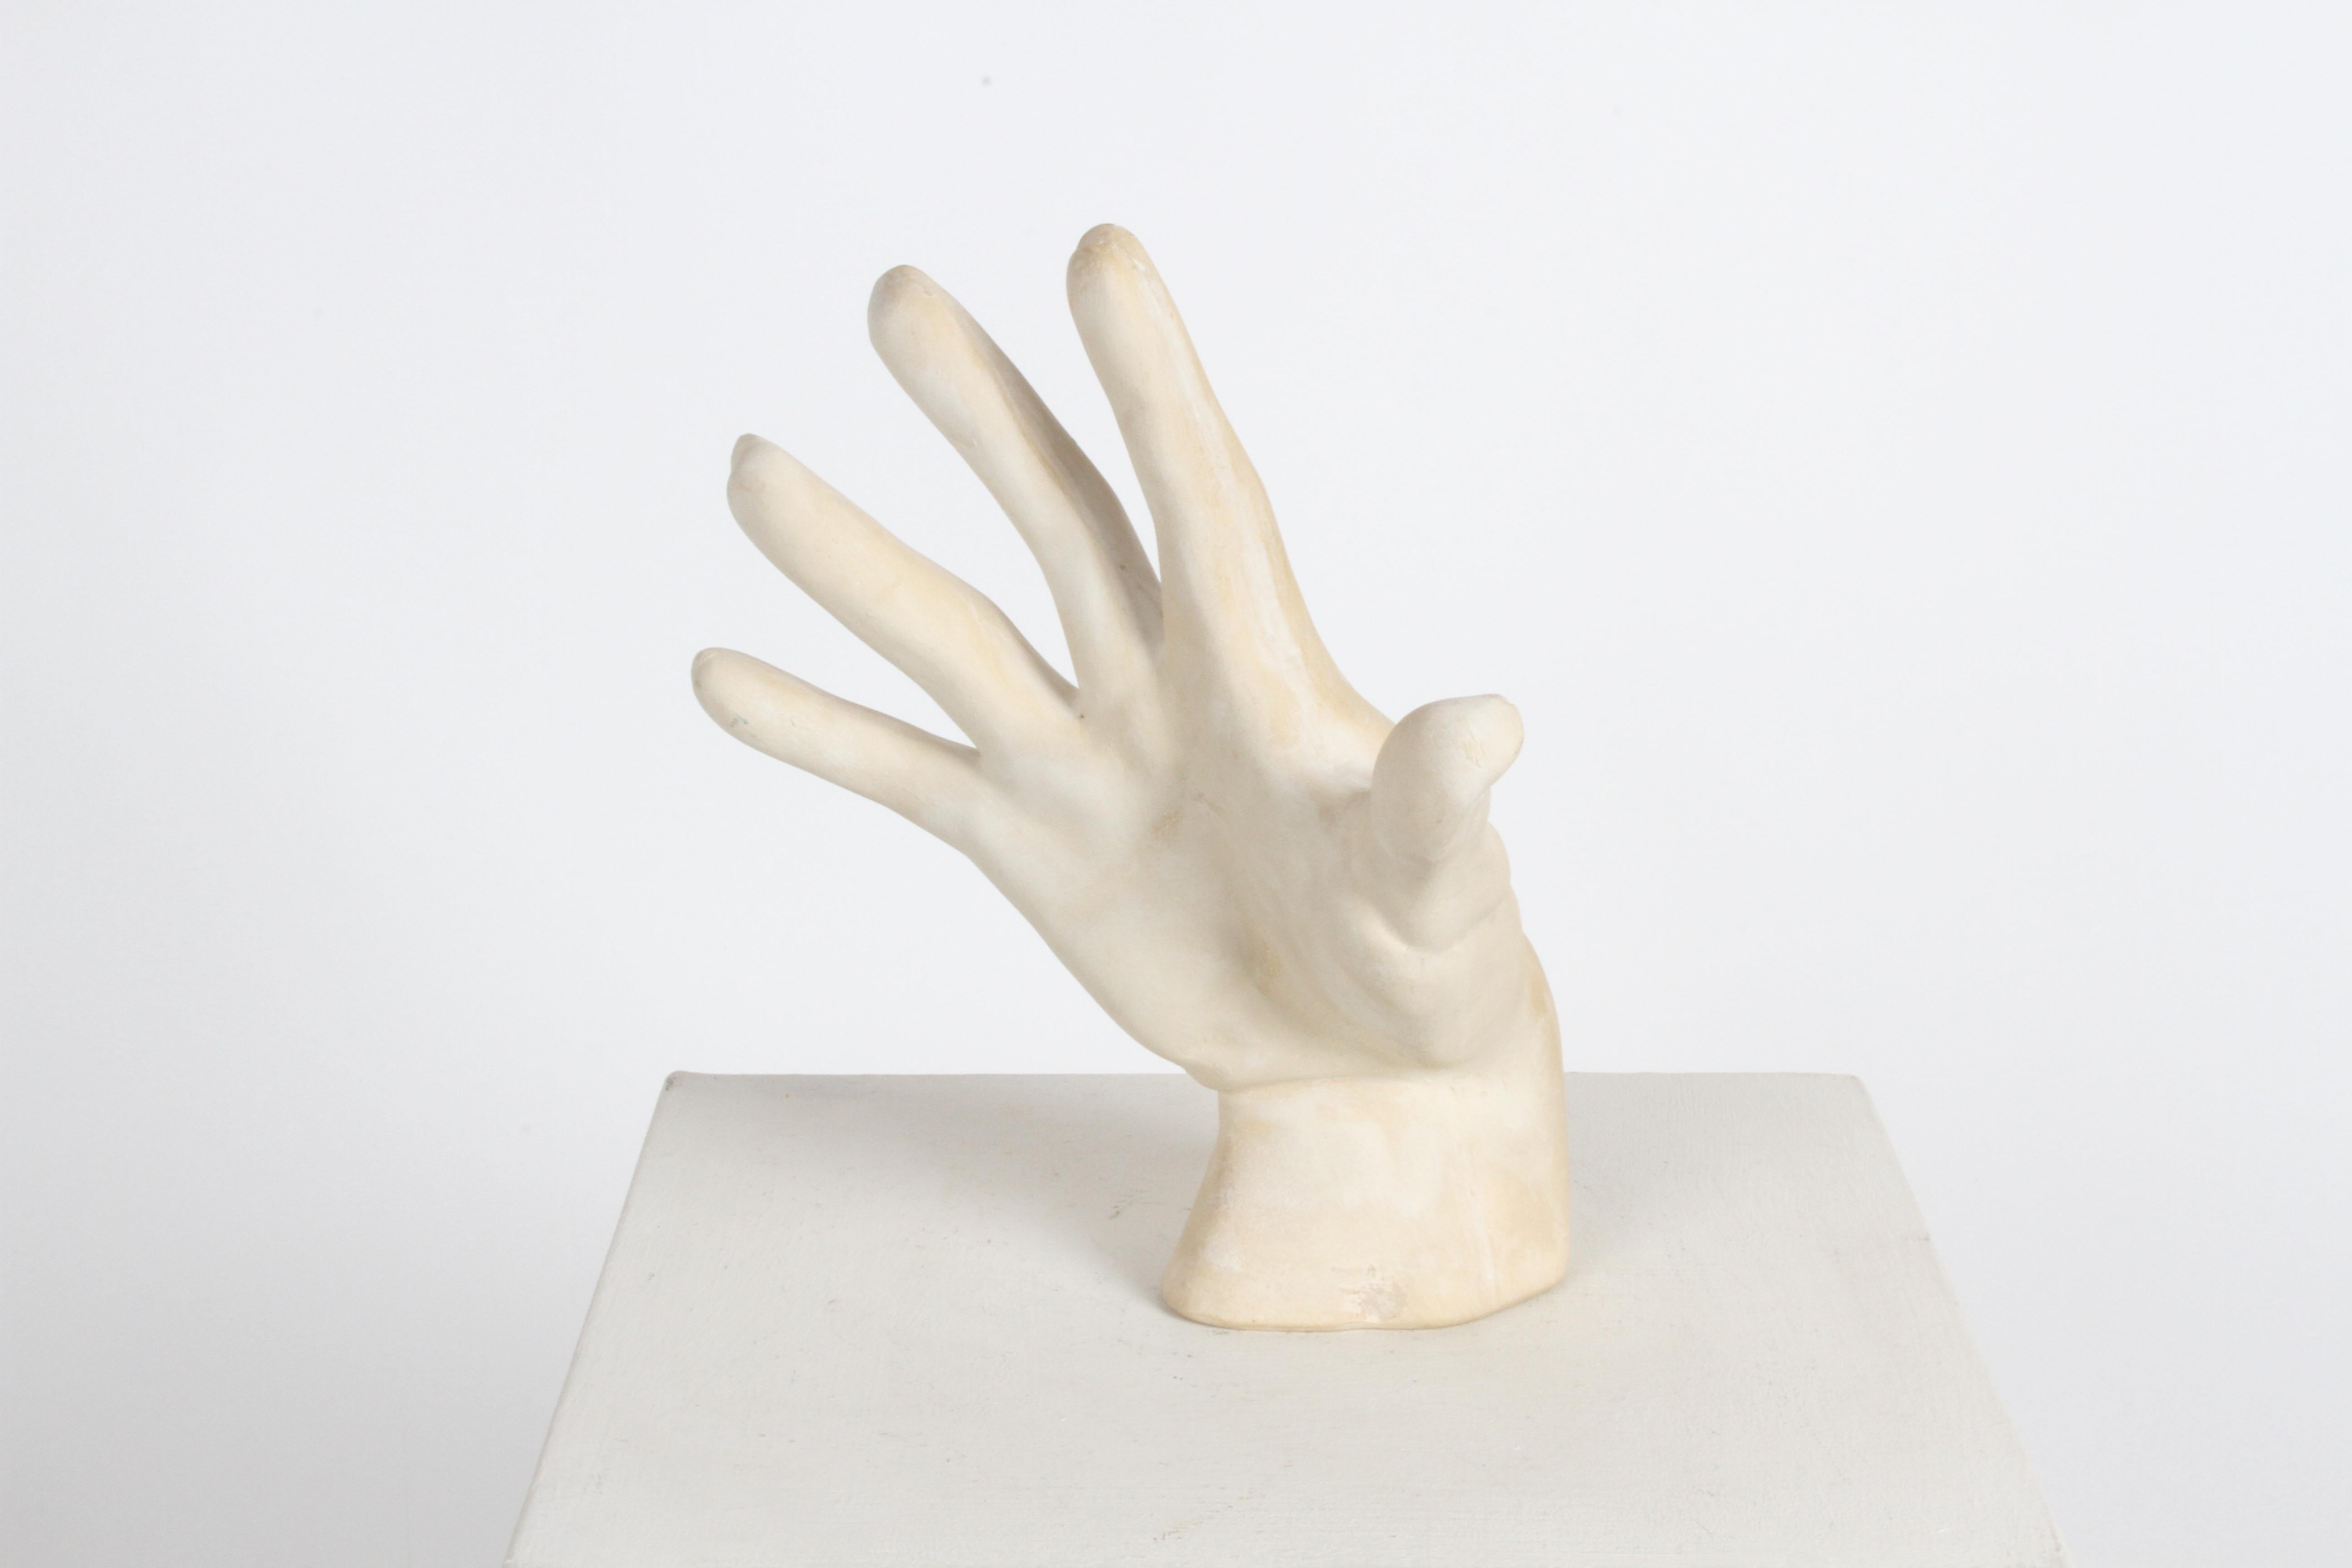 Large 1970s Plaster Artist Hand Study Table Sculpture, Style of John Dickinson In Good Condition For Sale In St. Louis, MO